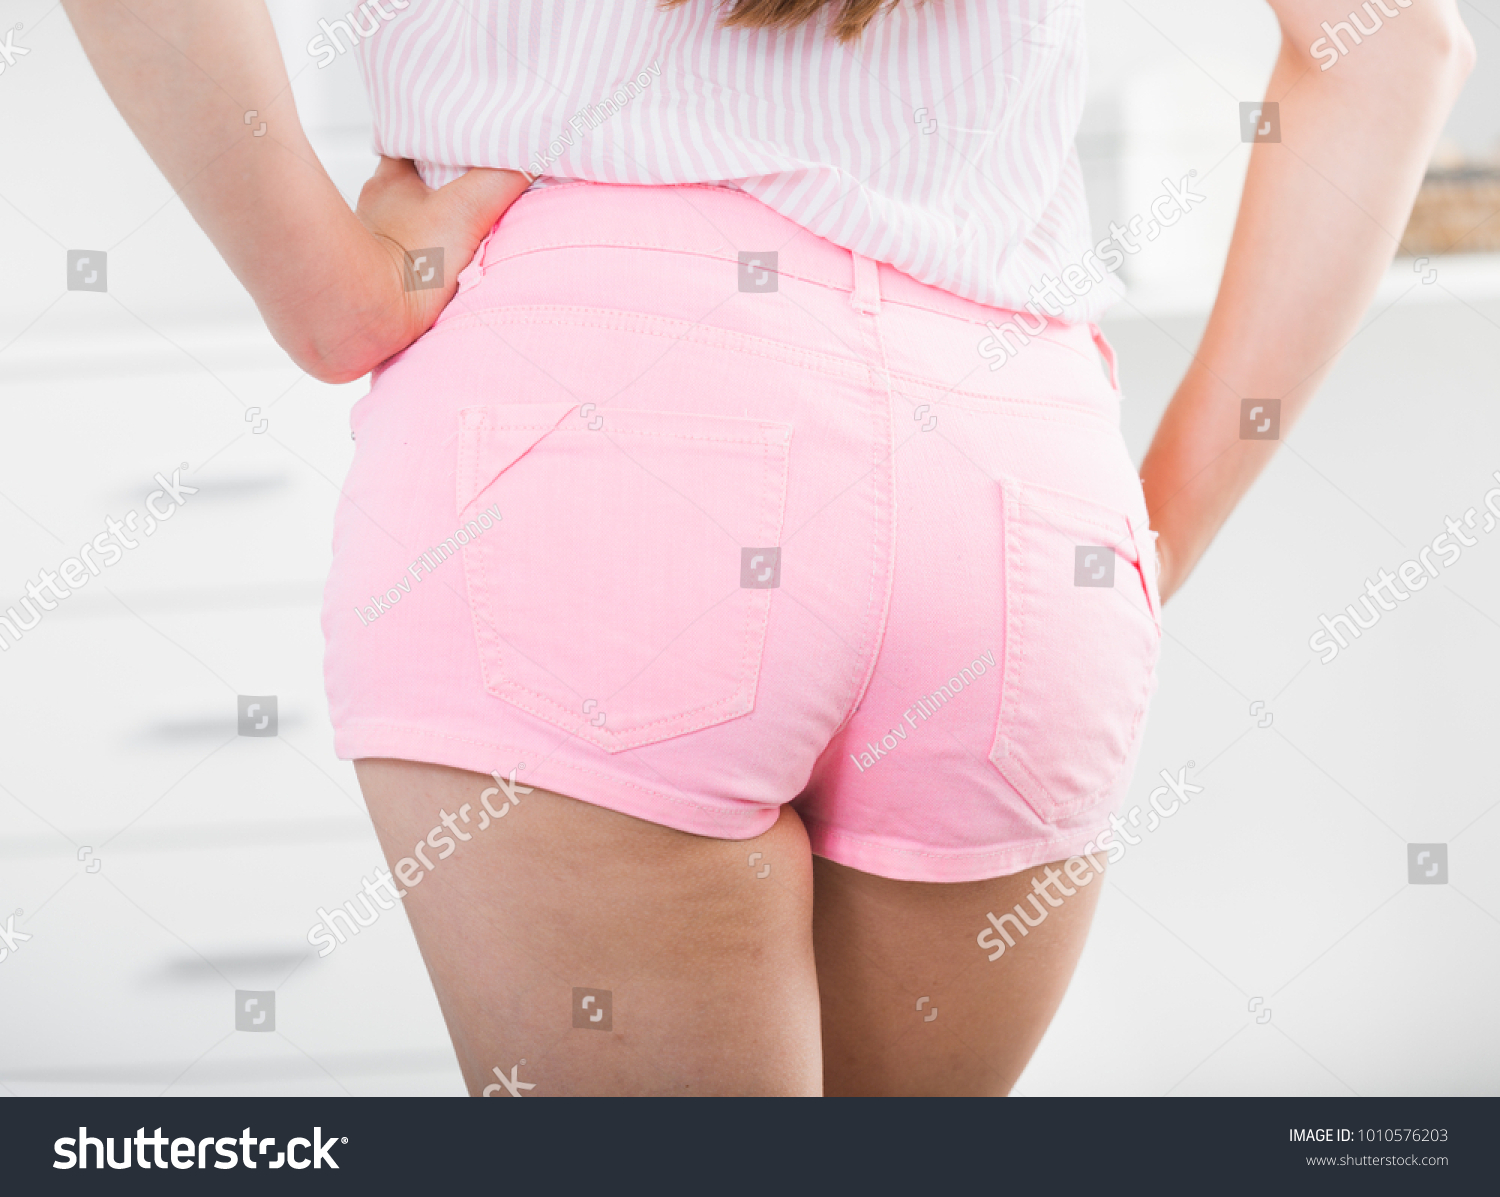 Pictures Of Women In Tight Shorts